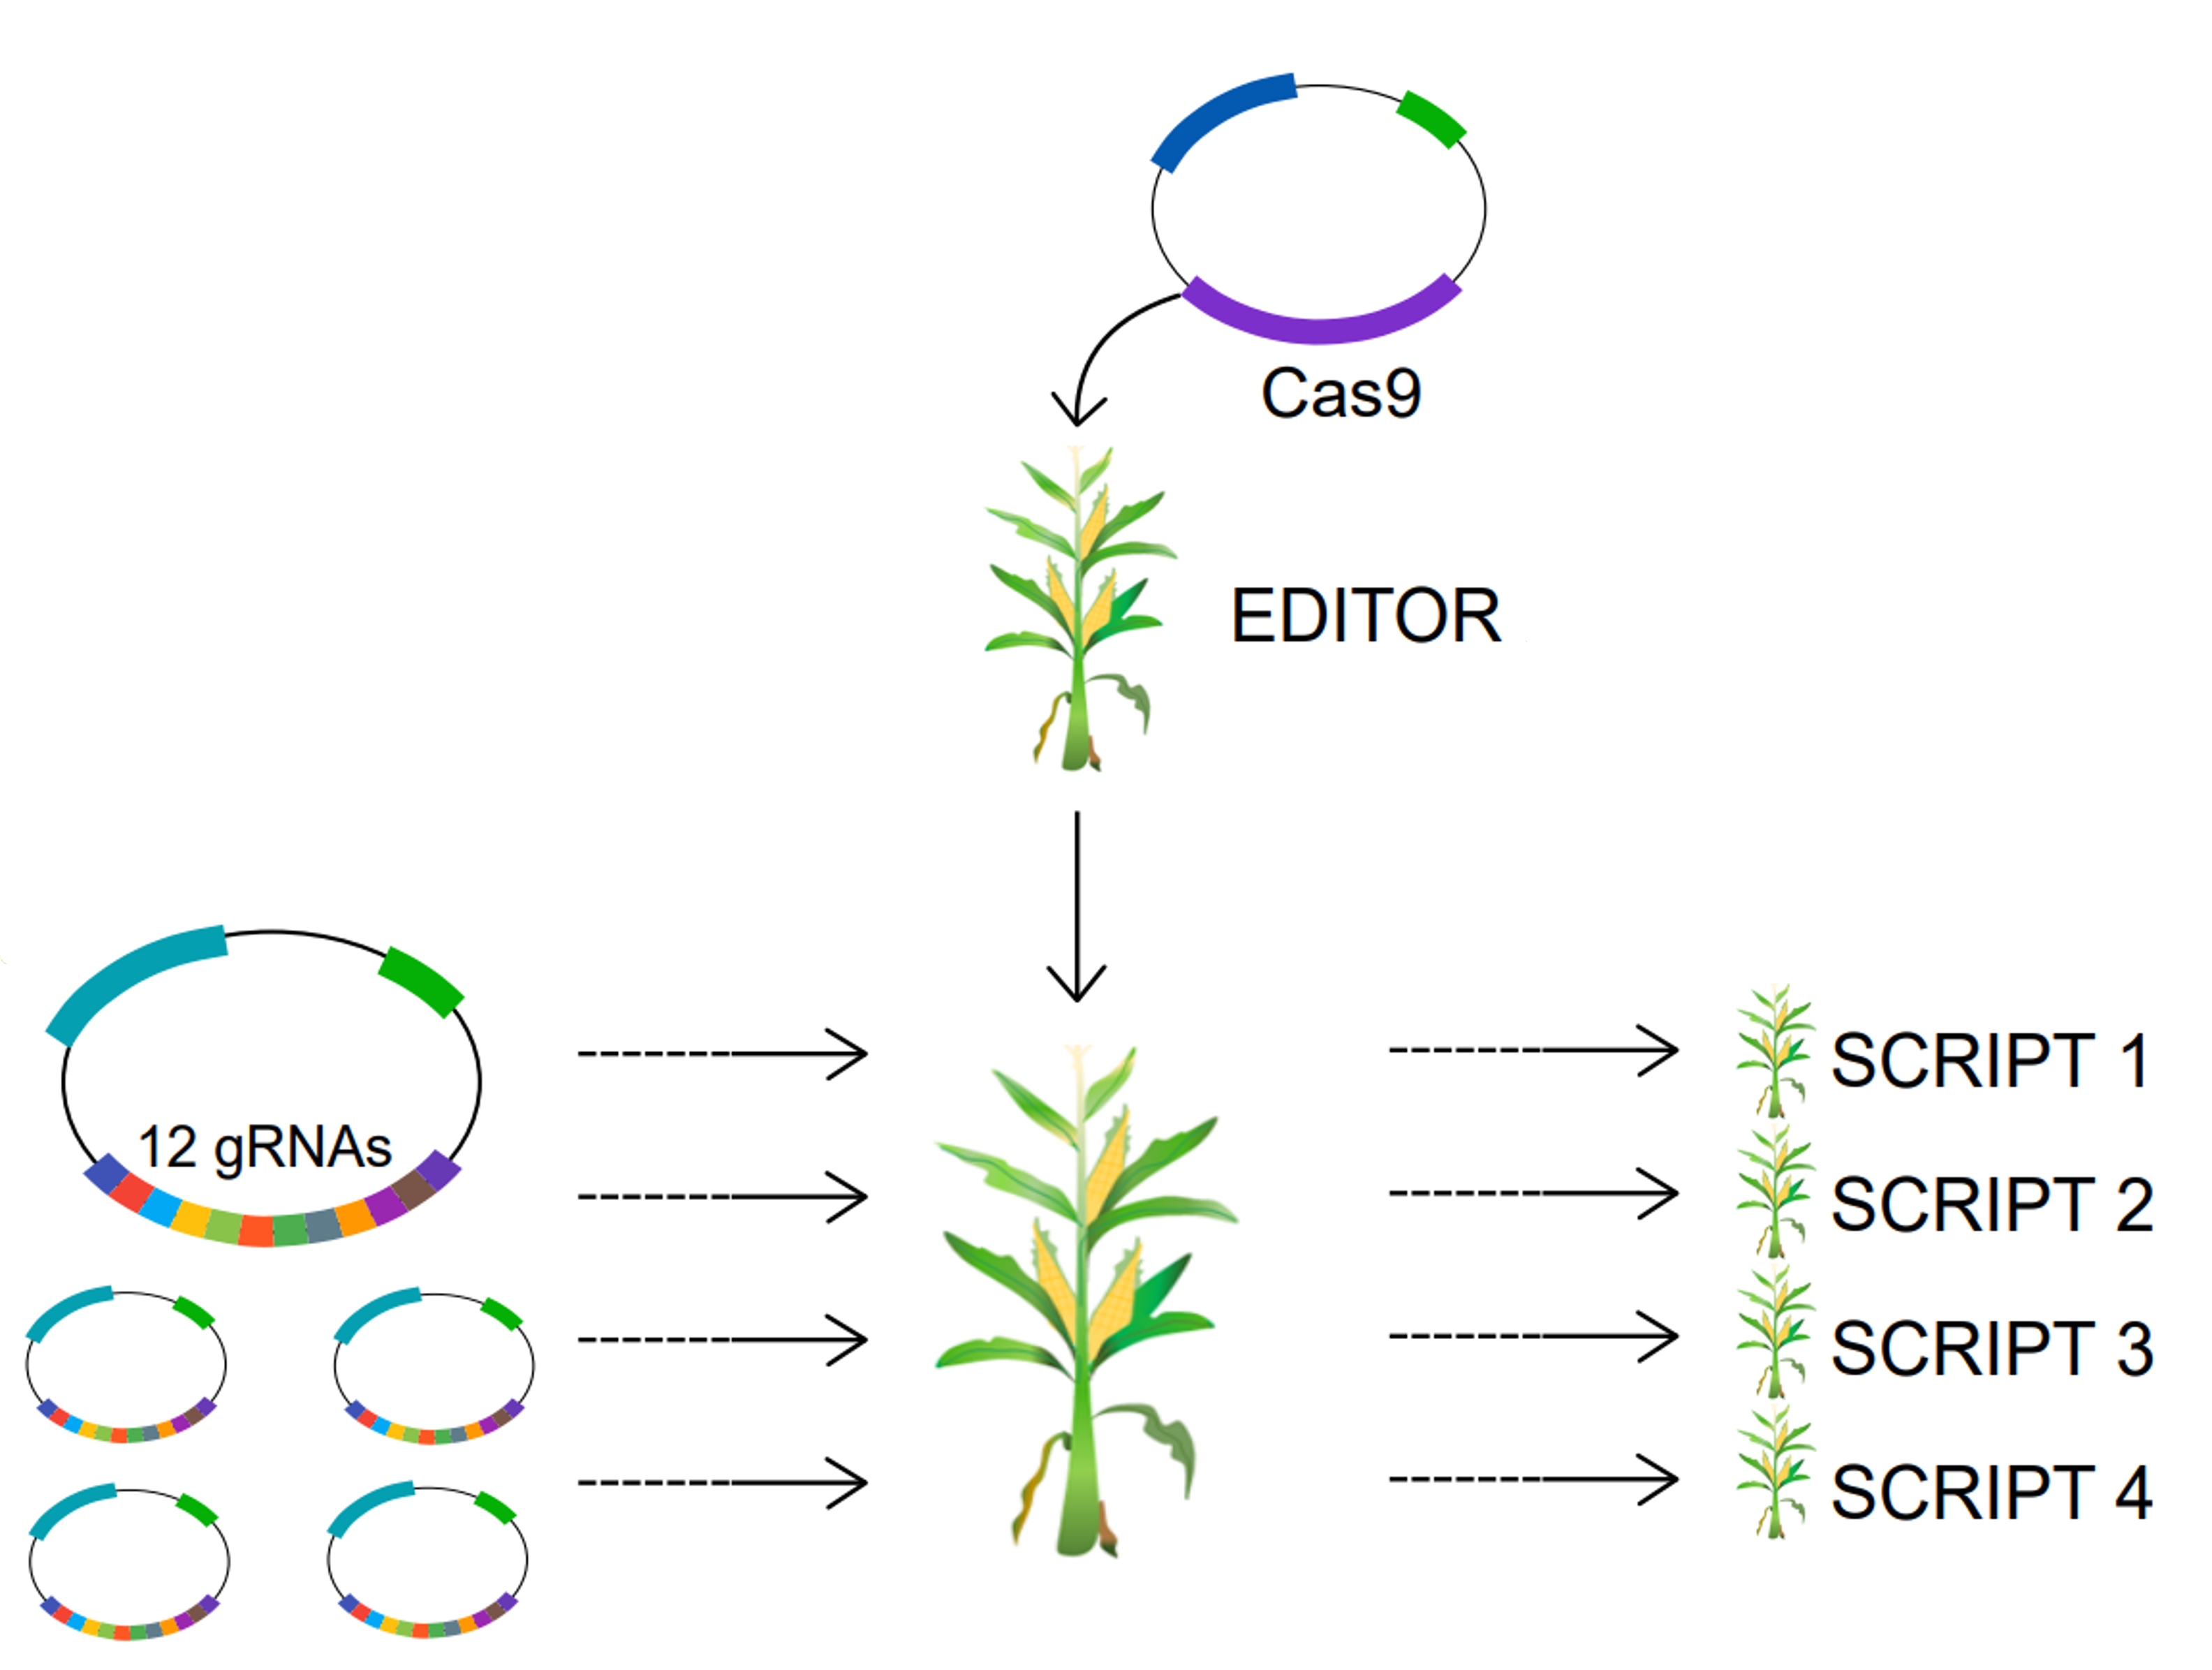 The BREEDIT strategy: 12gRNAs can be introduced at once in a Cas9-expressing maize plant (EDITOR). As a result, multiplex gene-edited maize plants are generated (indicated as SCRIPT 1-4).